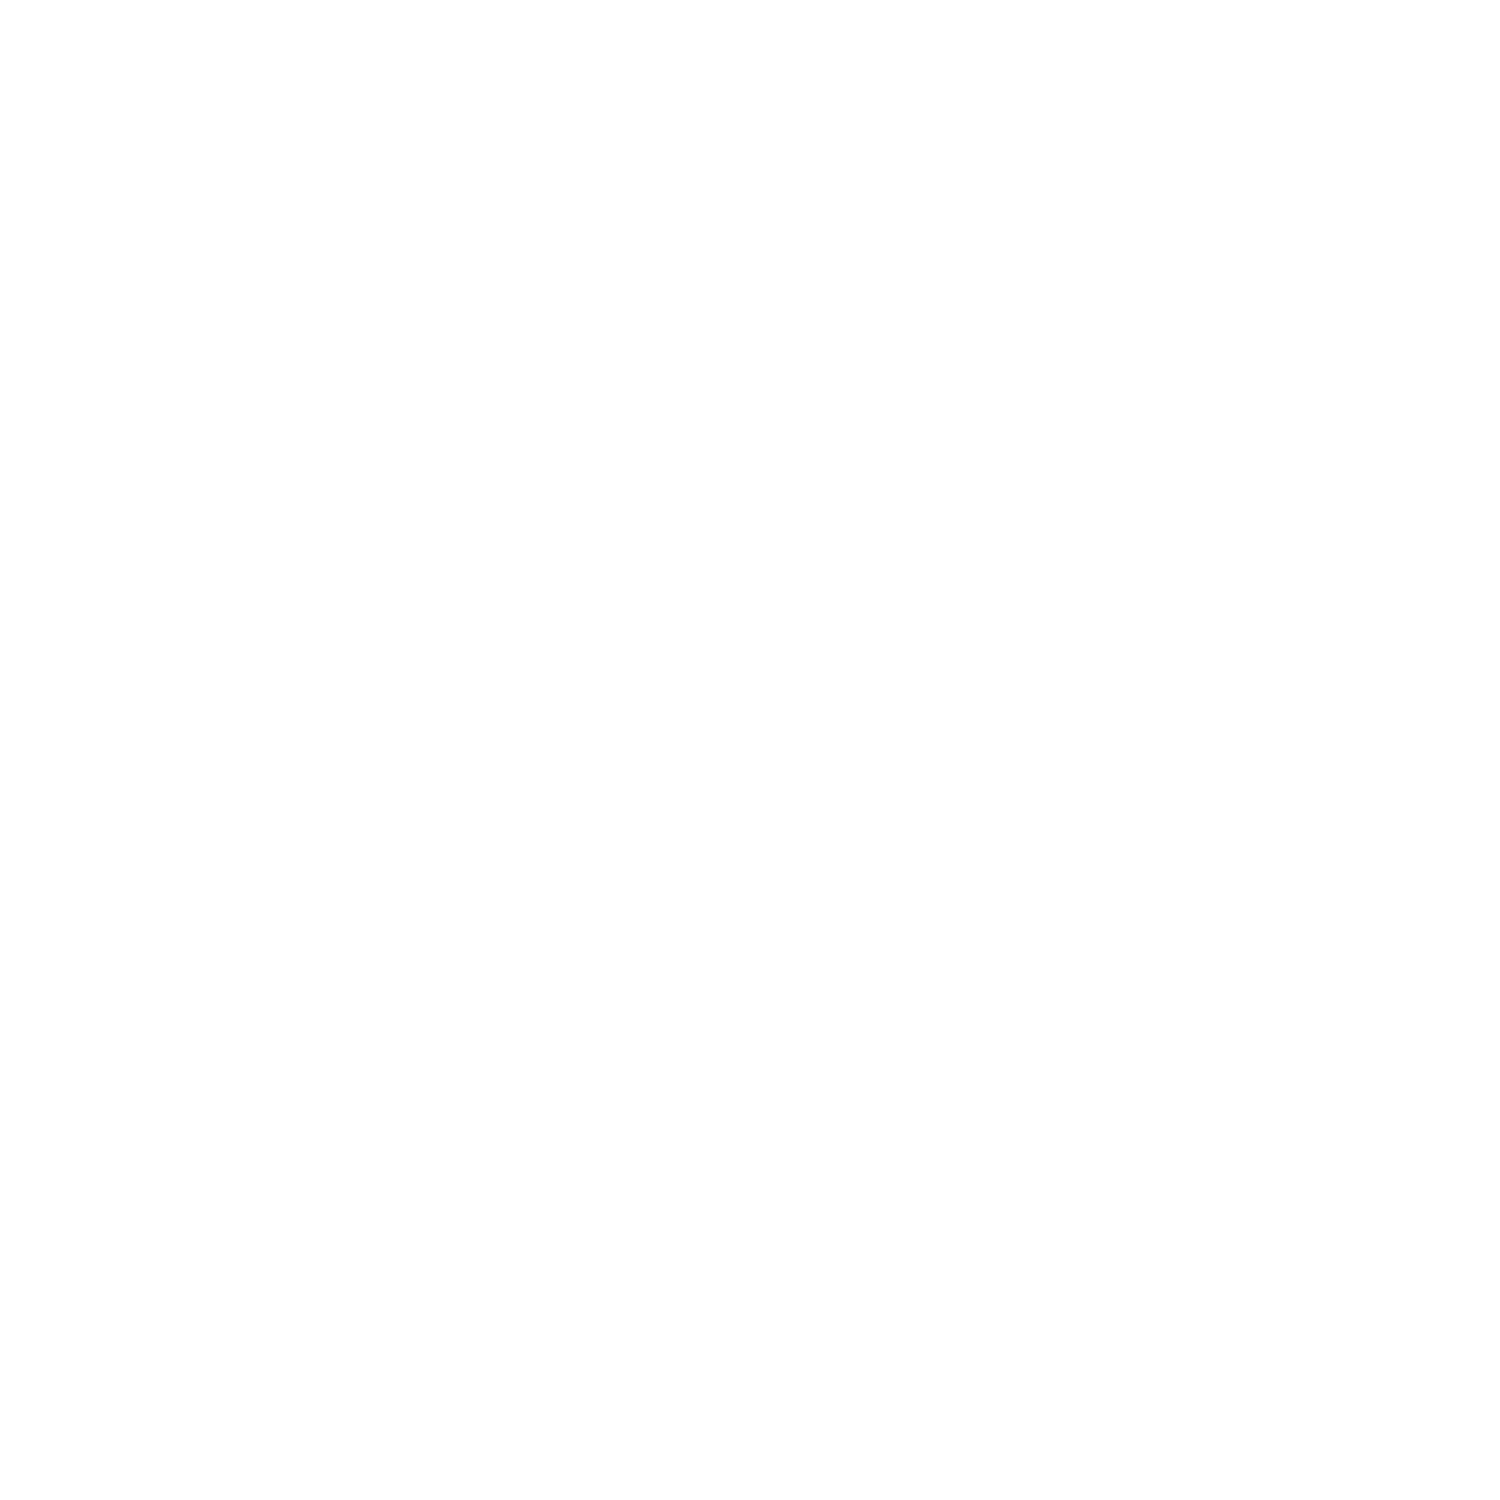 Get bonuses at the best betting websites and place bets on IPL 2021 events.